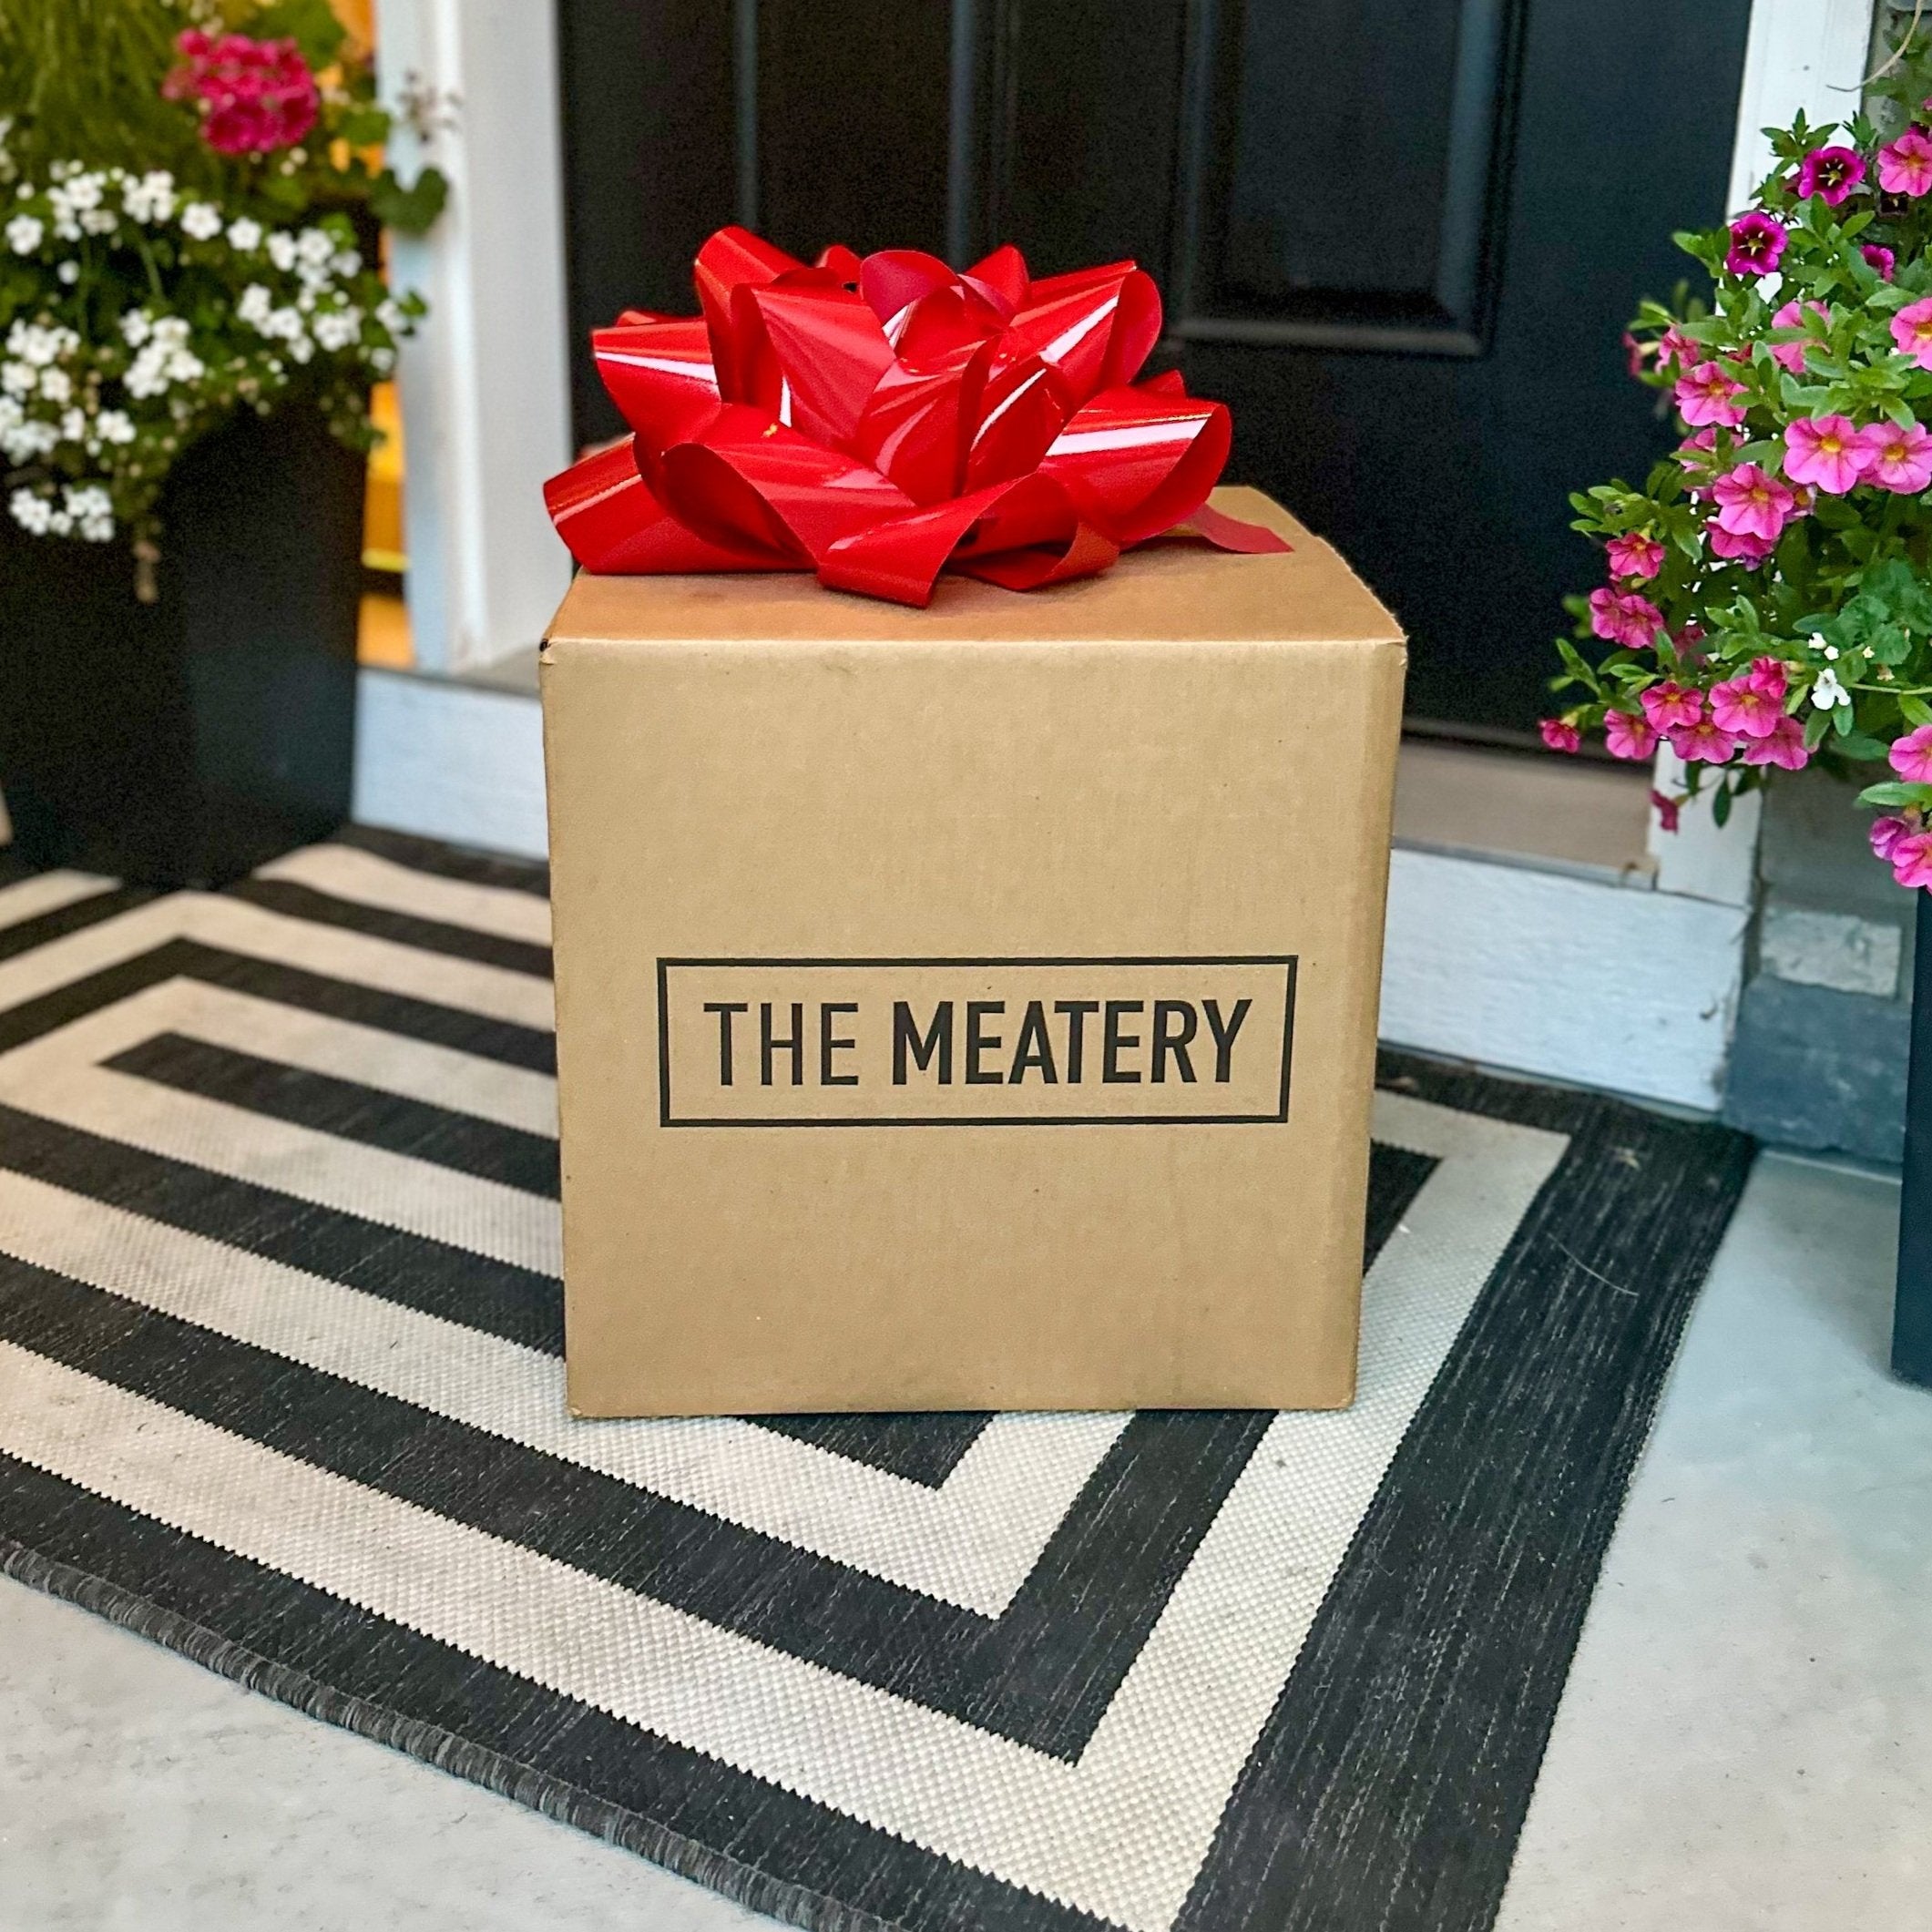 The Meatery offers quality meats from small family farms and producers shipped straight to your doorstep.